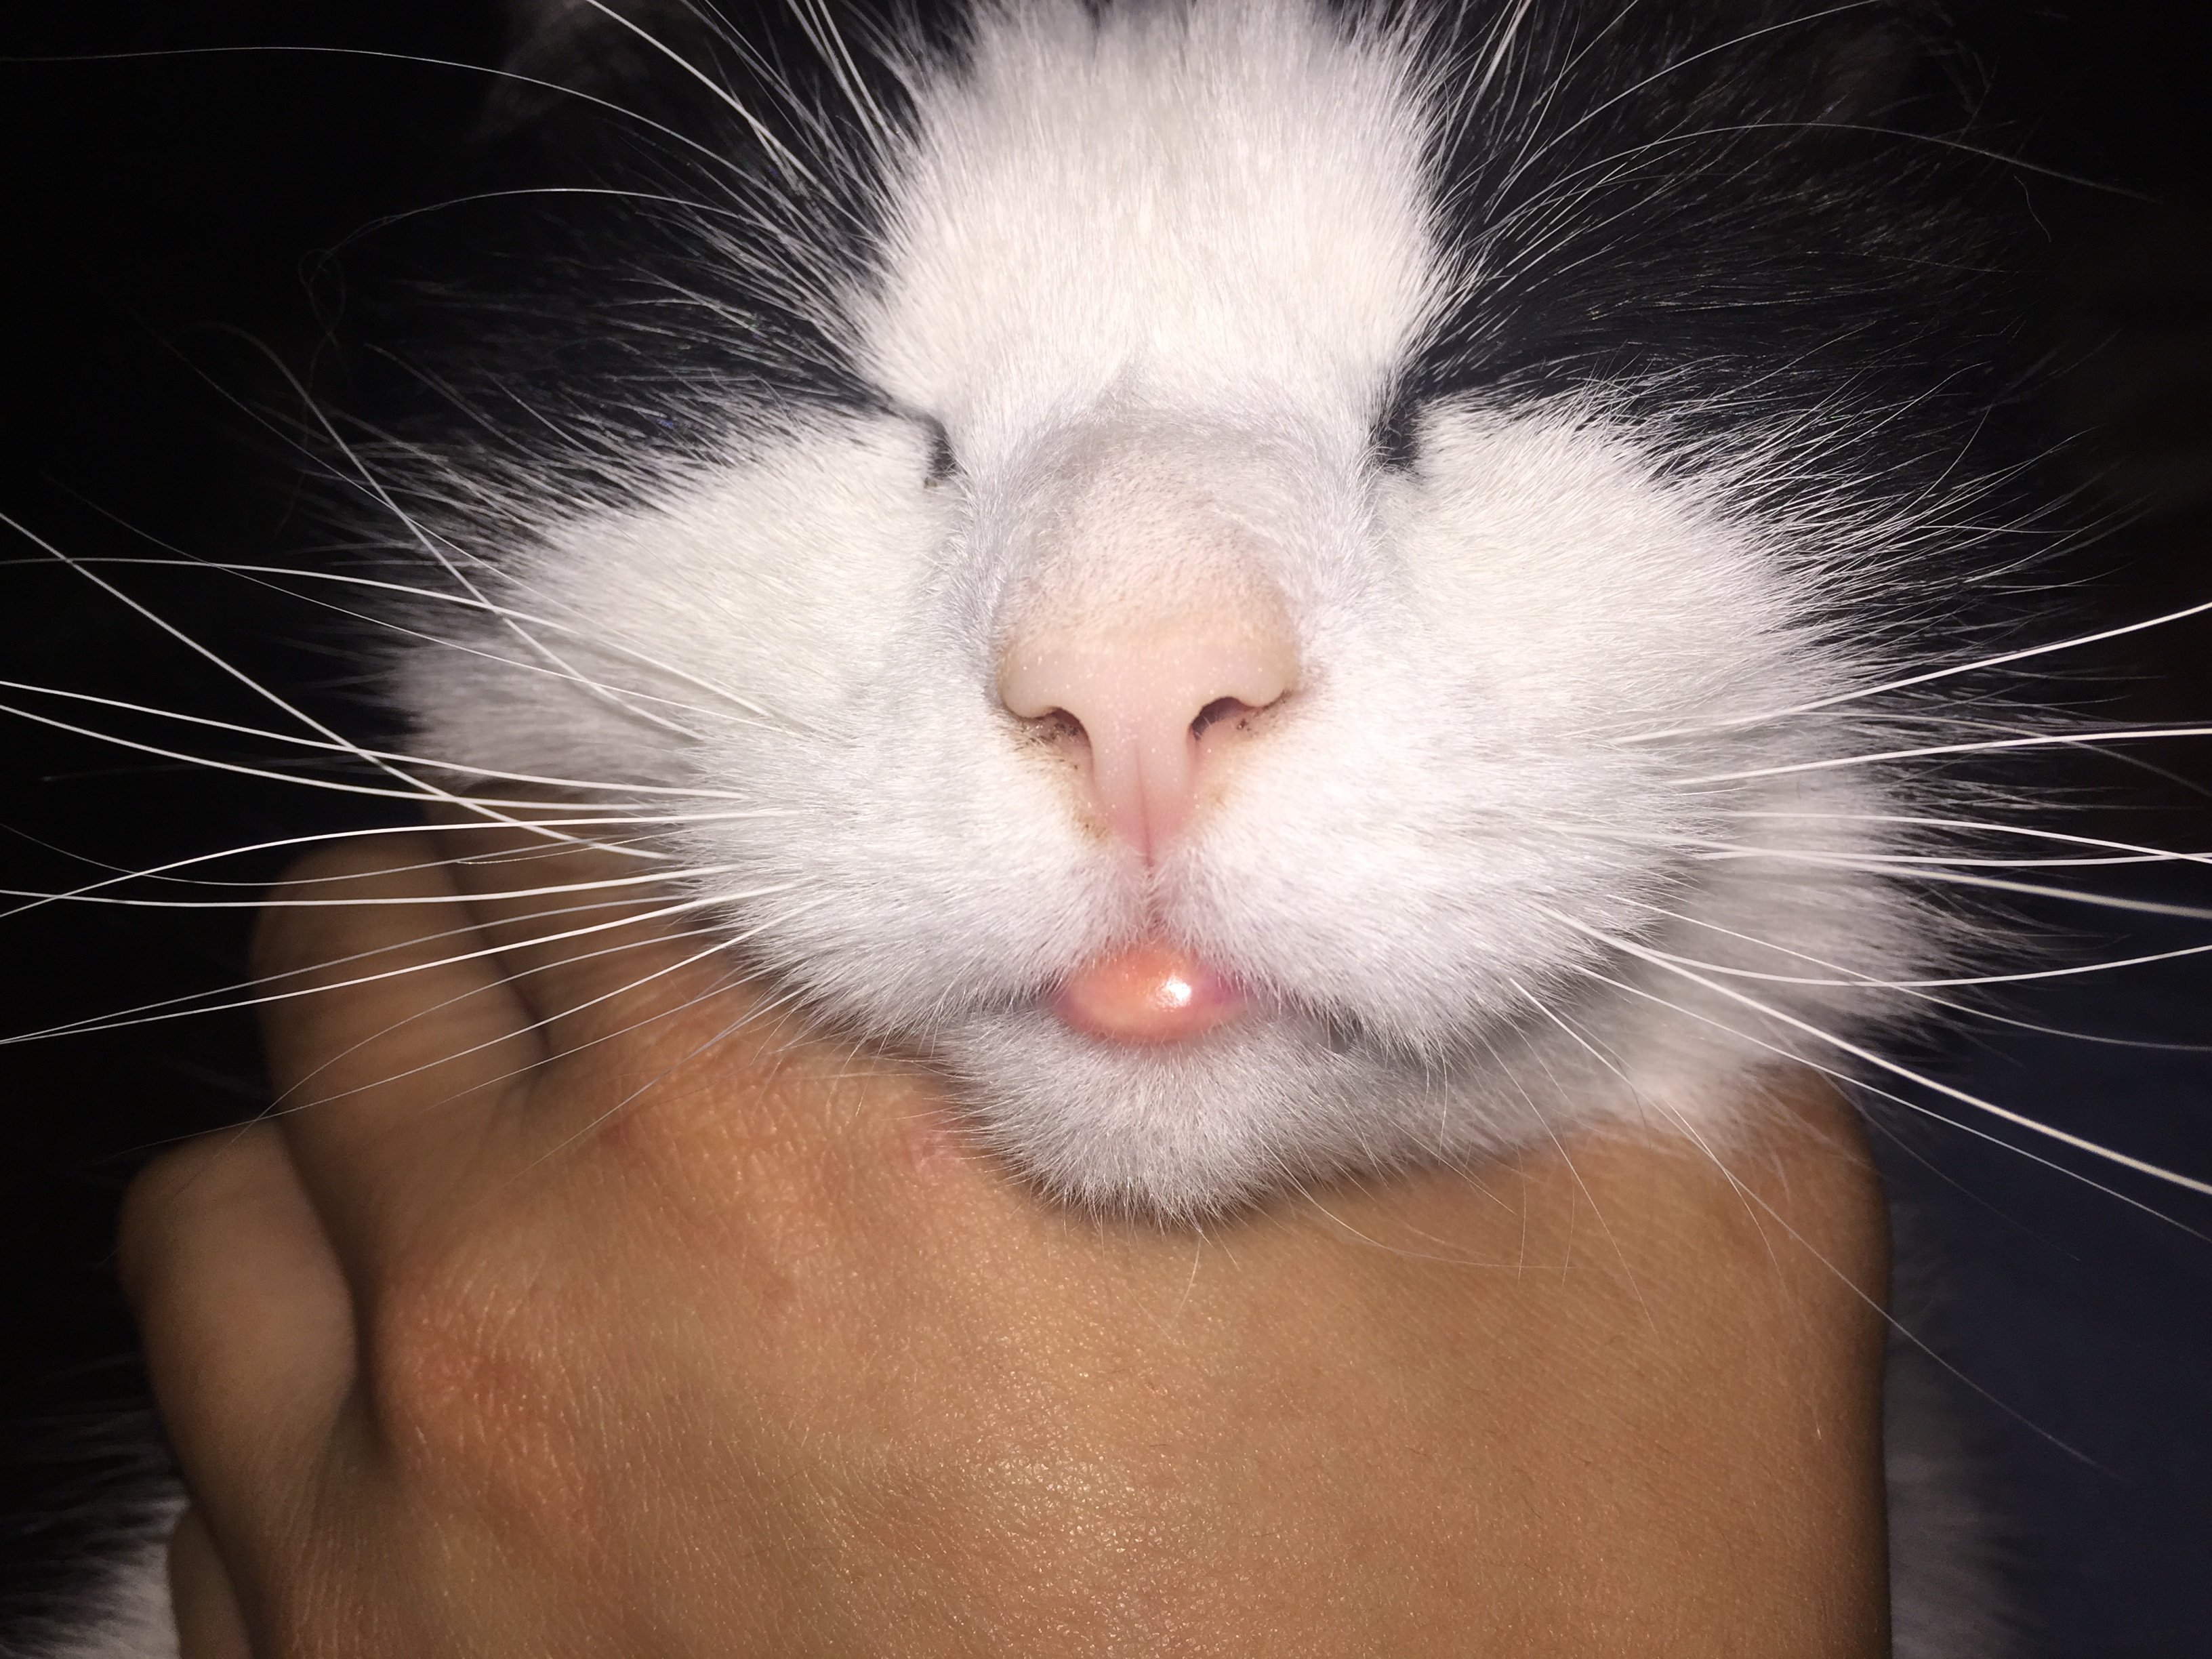 Swollen Bottom Lip! Please Advise If You Can... TheCatSite